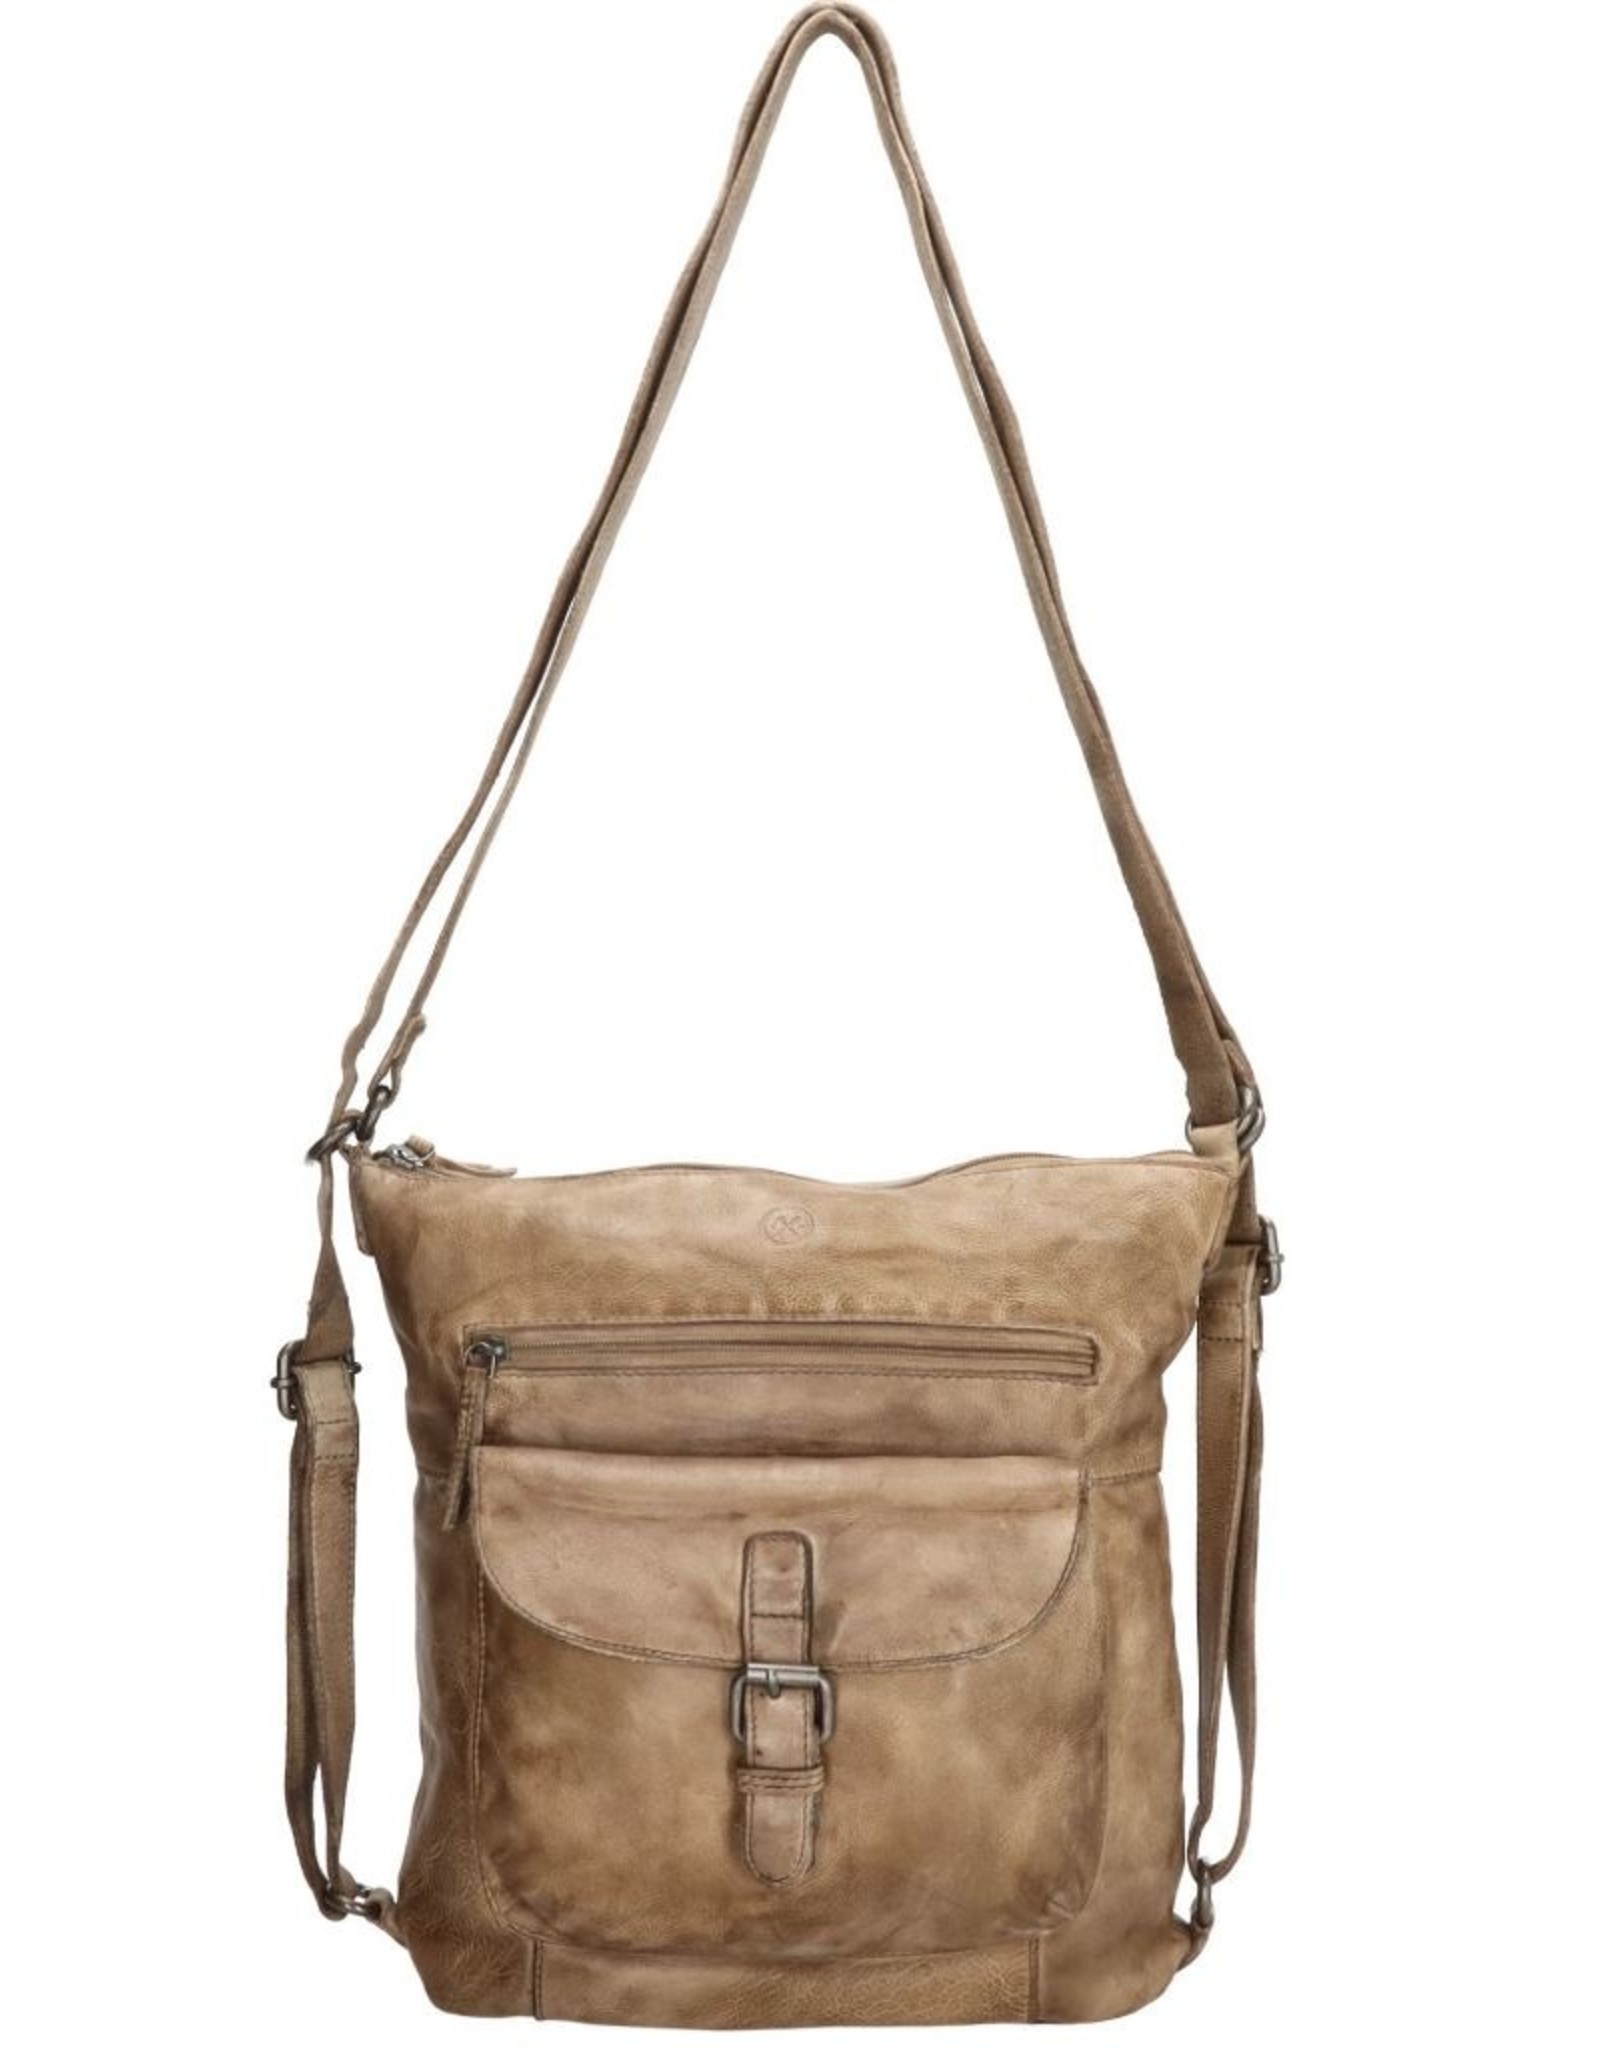 Hide & Stitches Leather backpacks Leather shoppers - Hide & Stitches Paint Rock Backpack-Shoulder bag sand